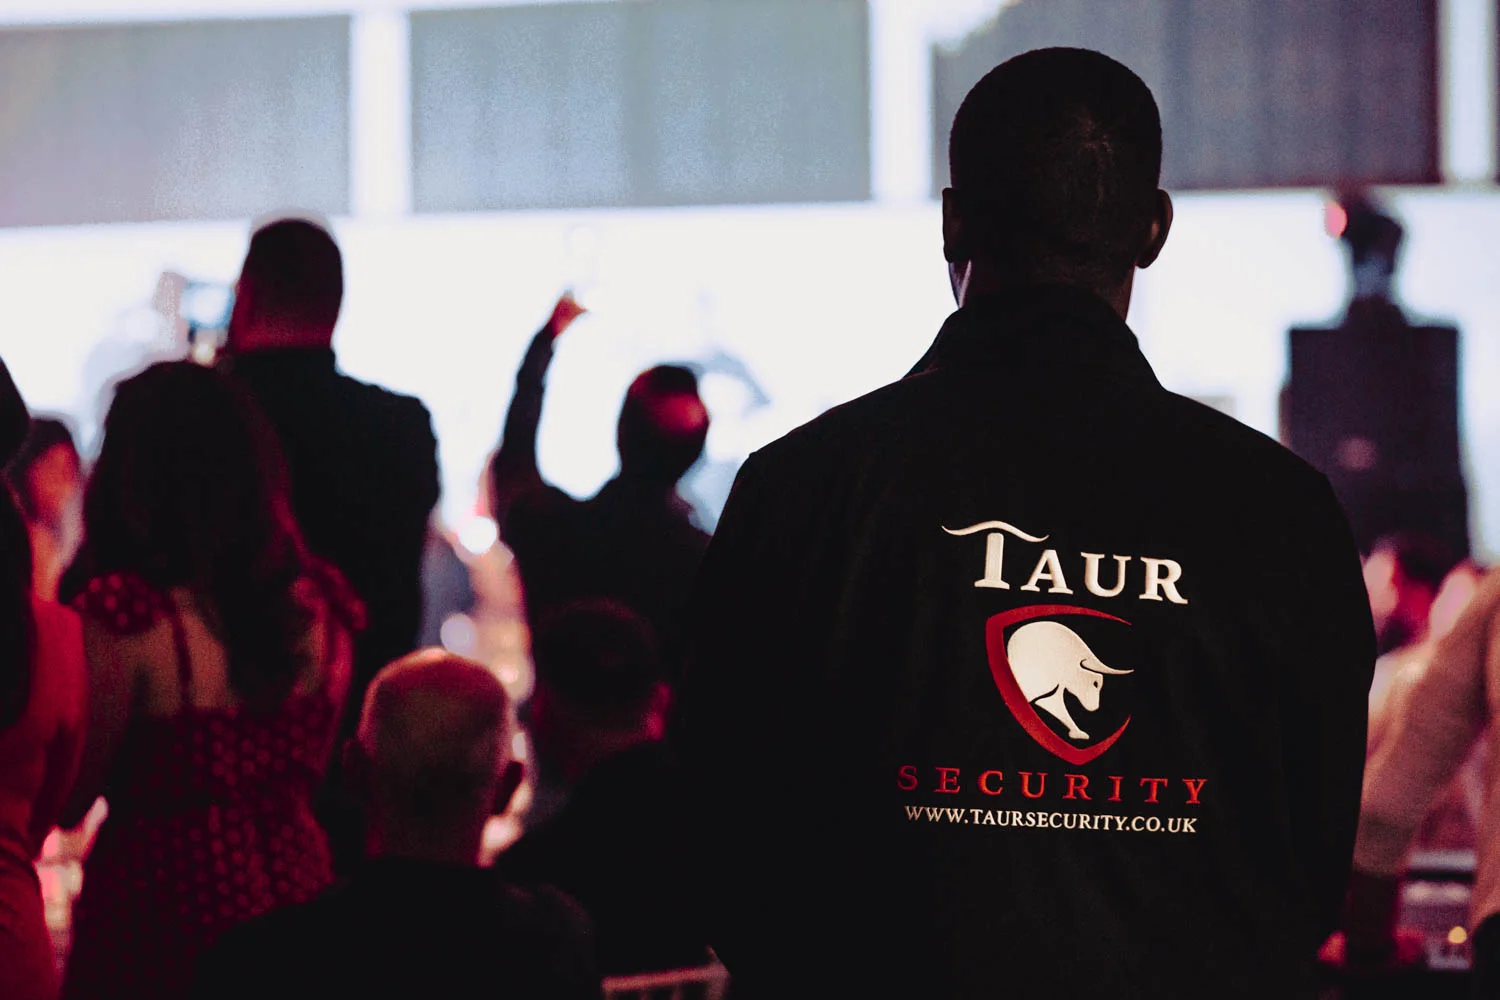 Club Security Services at Taur Security